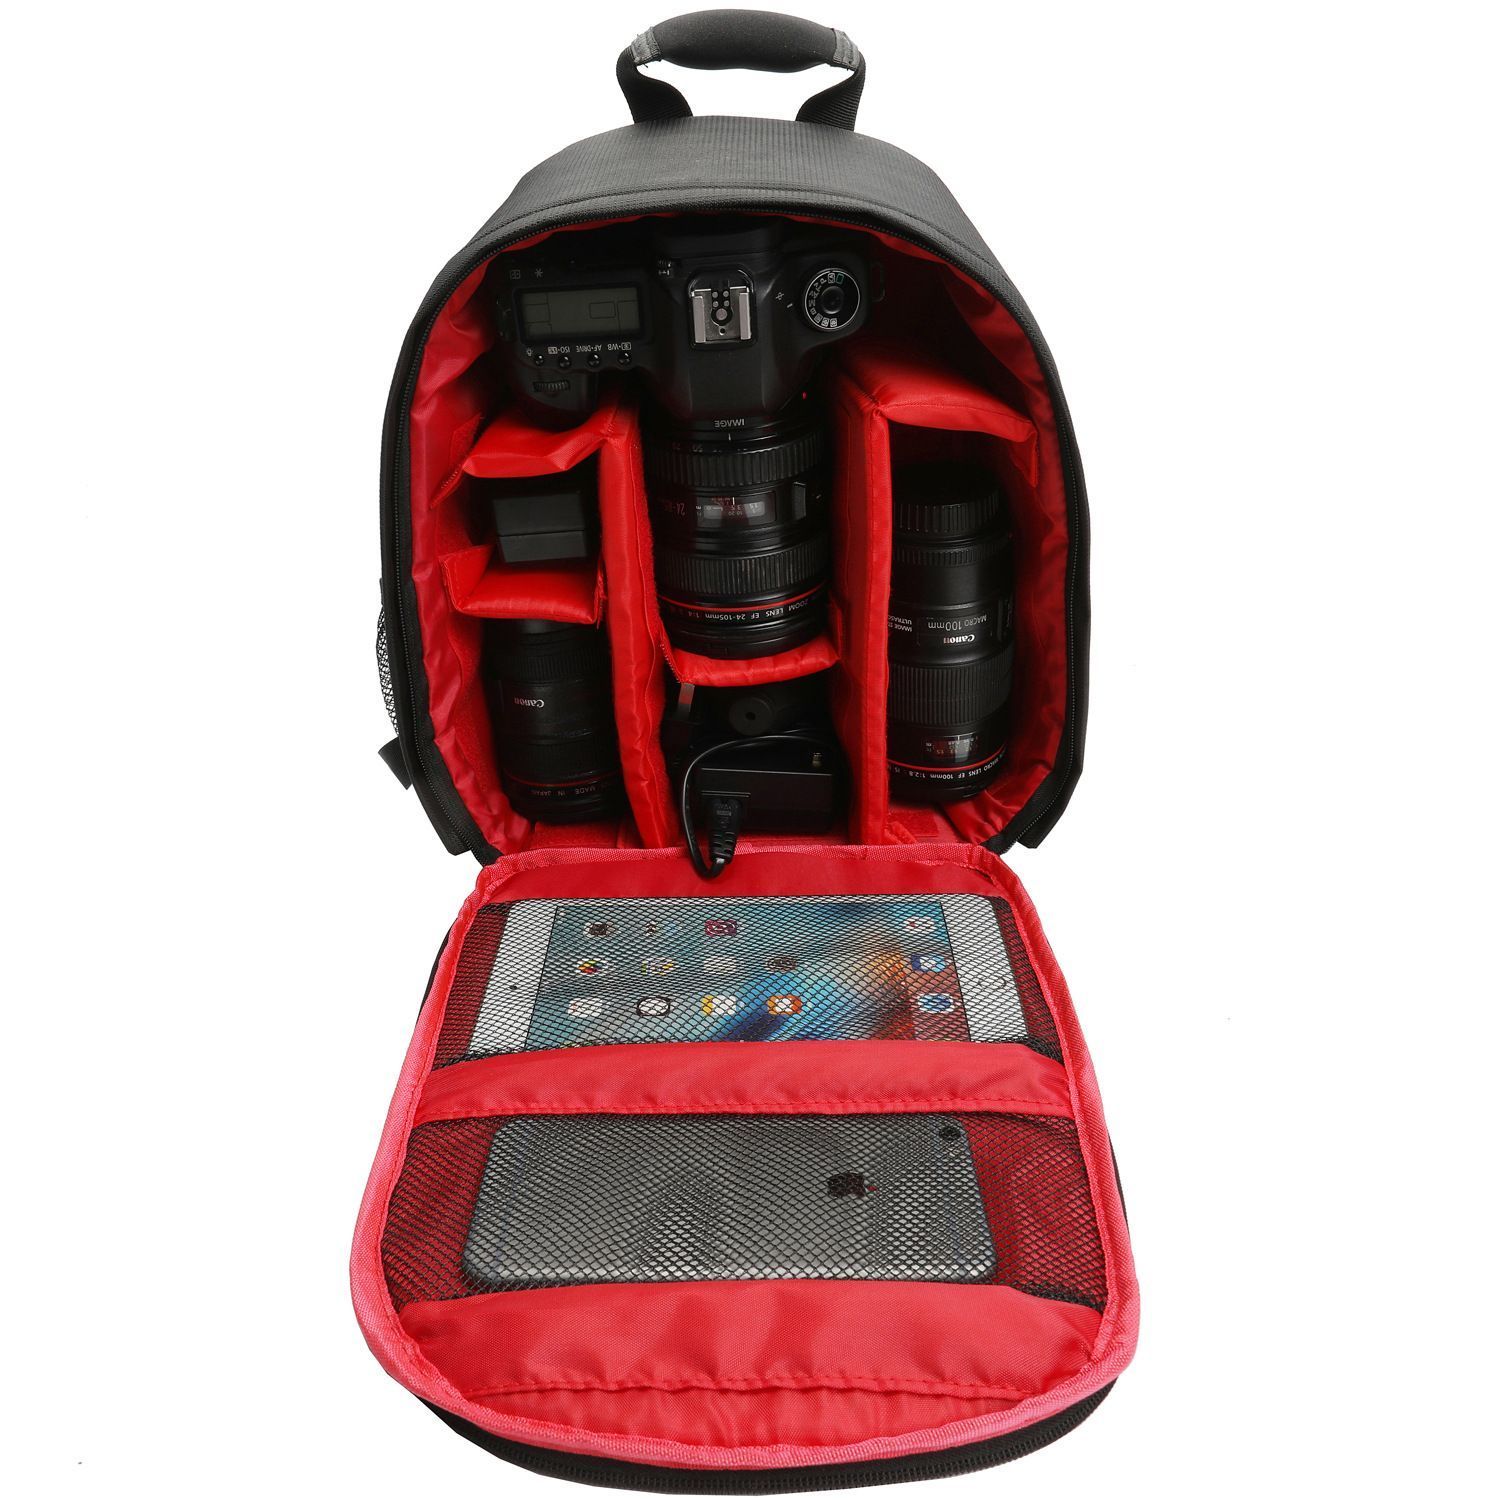 Water-resistant-Shockproof-Travel-Carry-Camera-Bag-Backpack-for-Canon-for-Nikon-DSLR-Camera-Tripod-L-1610735